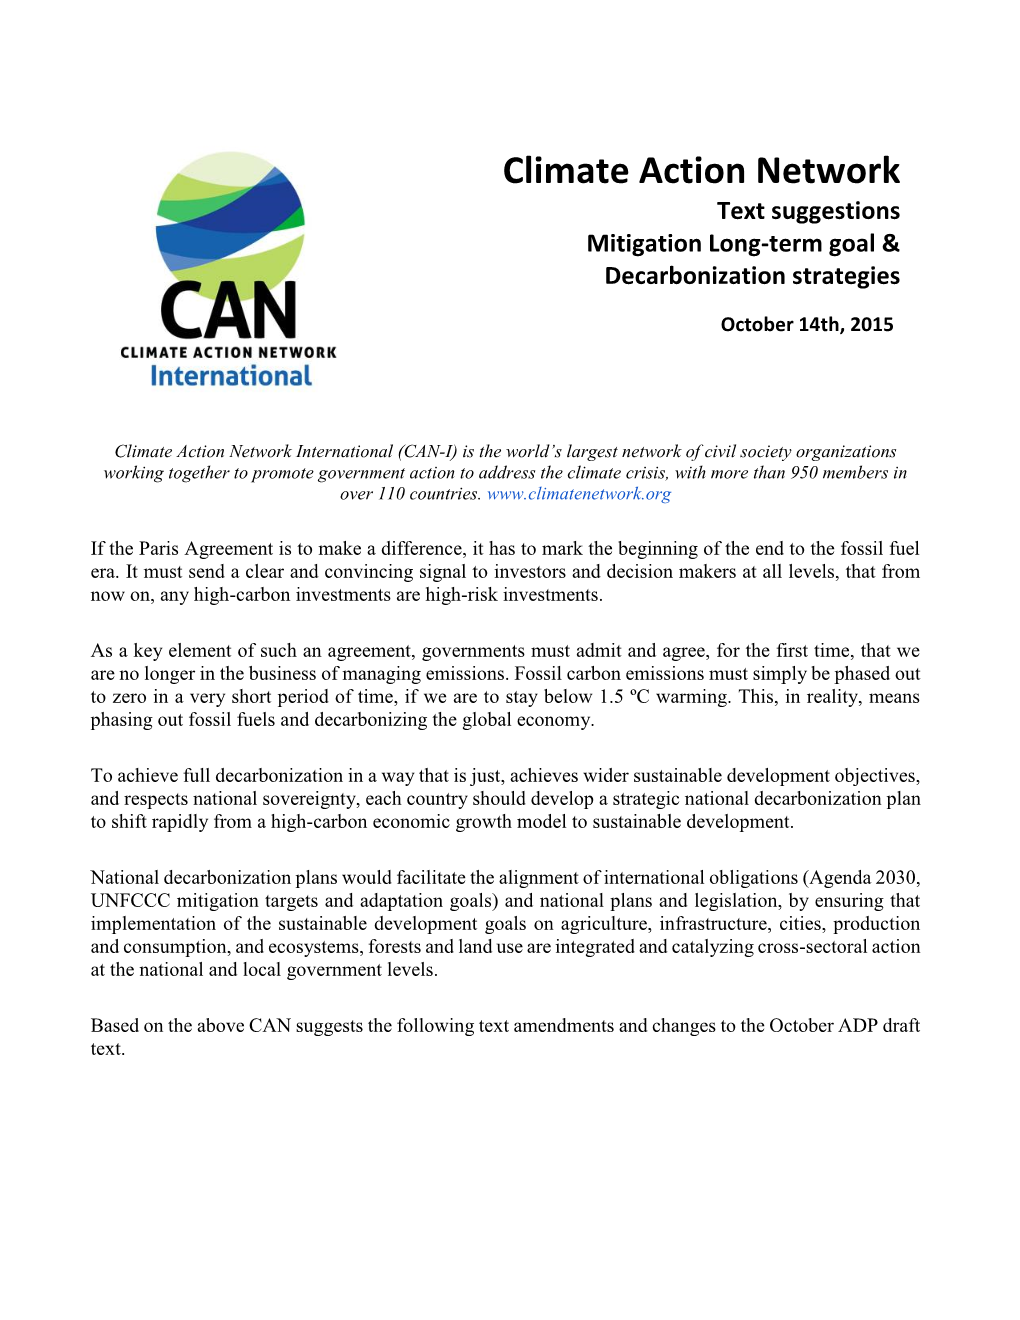 Climate Action Network Text Suggestions Mitigation Long-Term Goal & Decarbonization Strategies